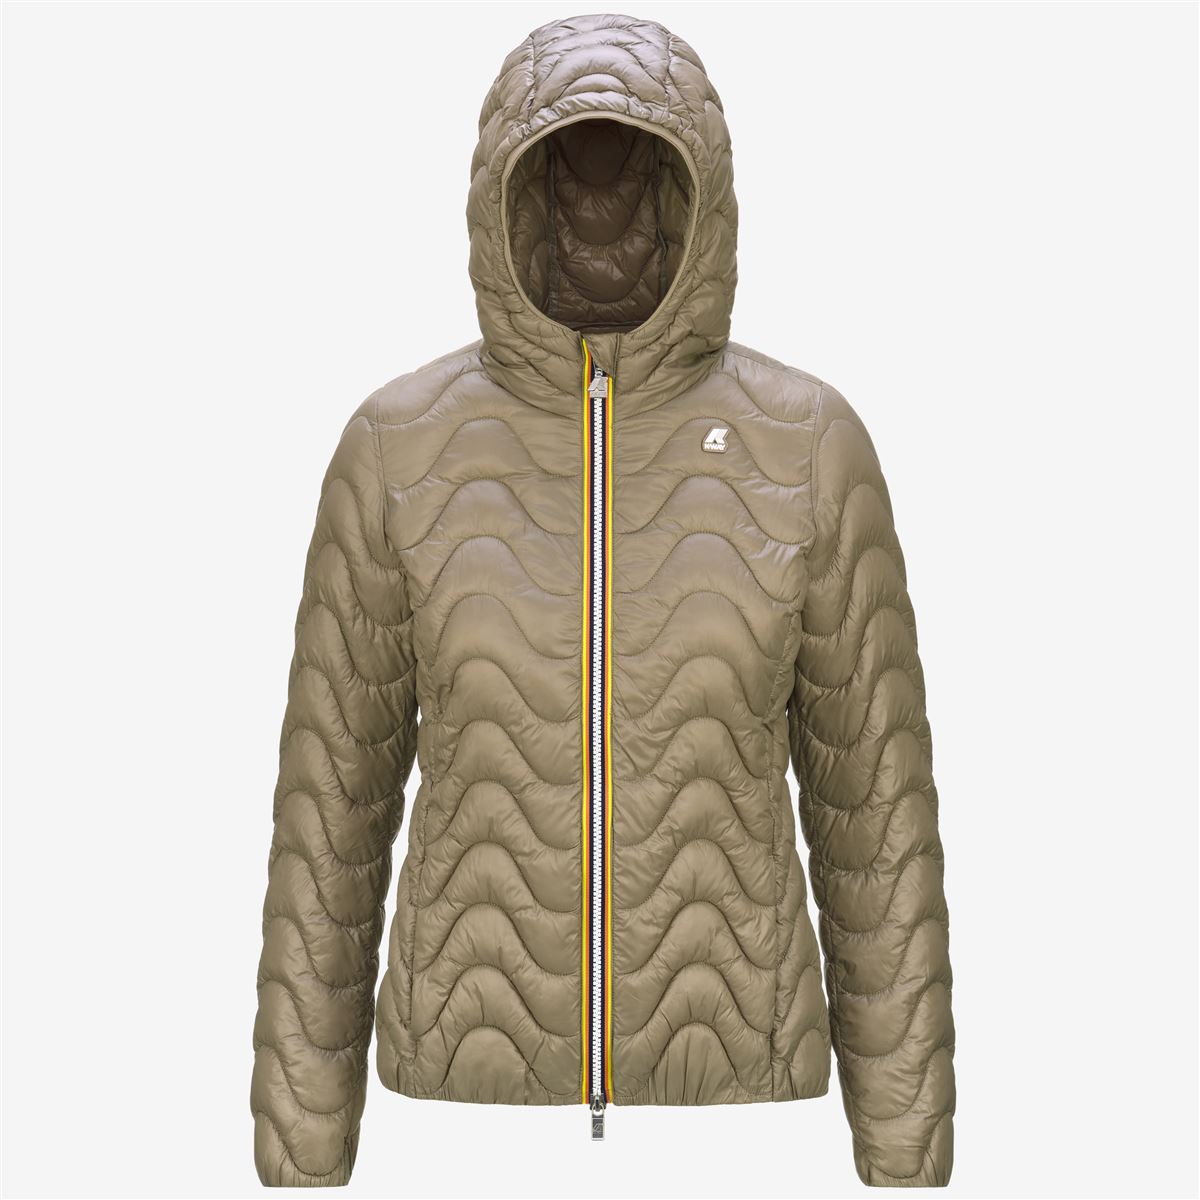 LILY ECO WARM - JACKET - WOMAN - BEIGE TAUPE